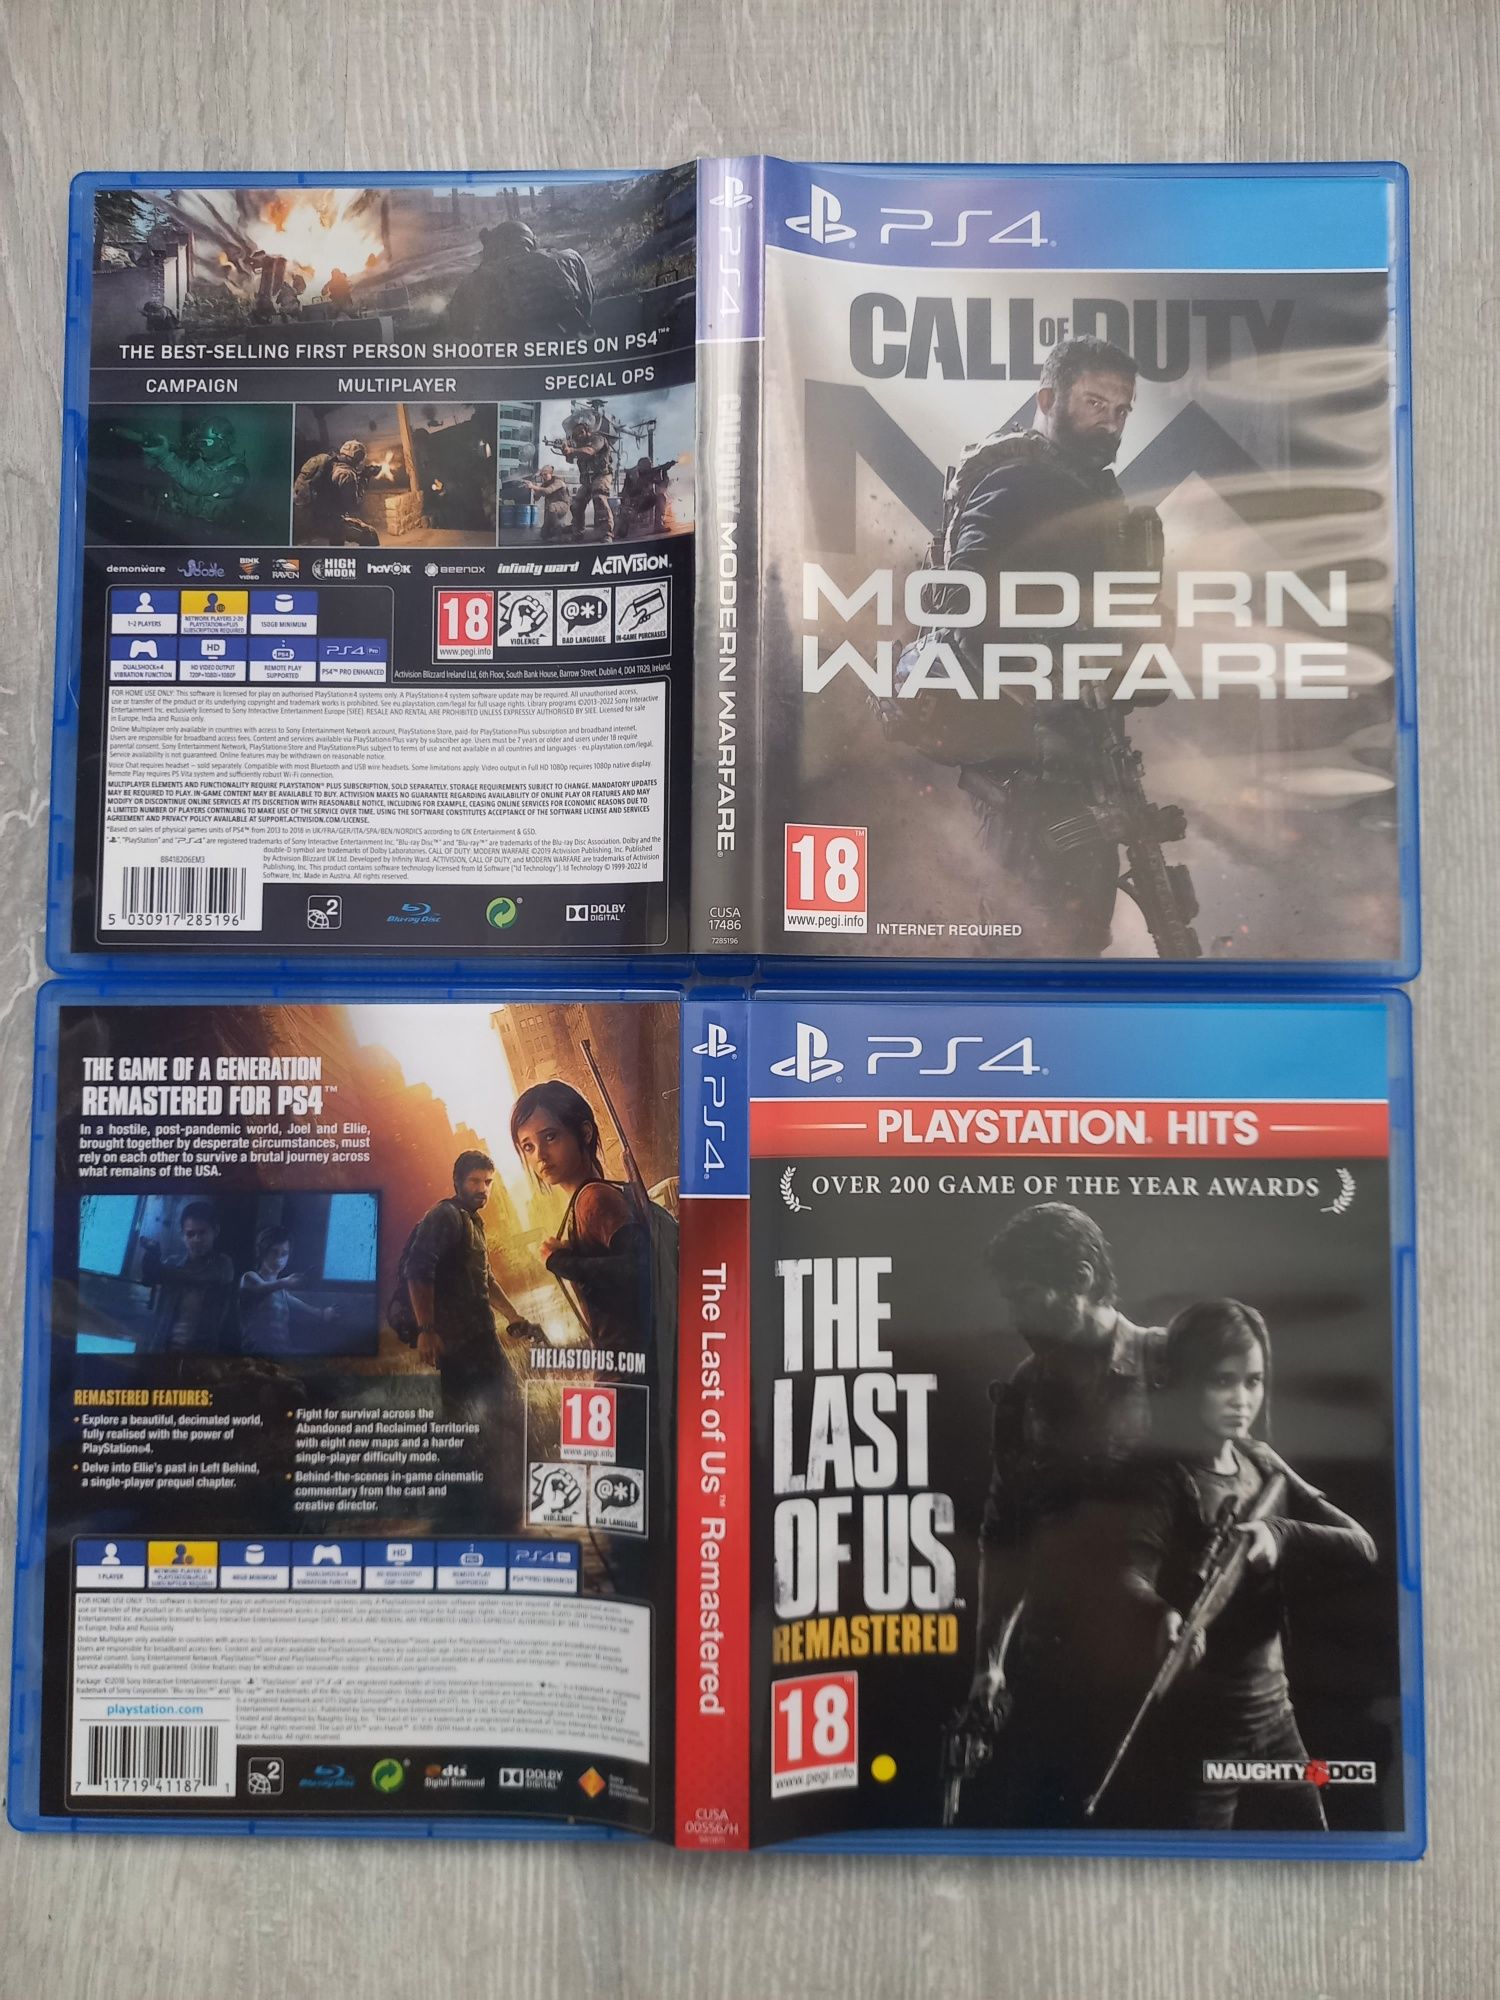 Call of duty Modern Warfare / The last of us. PS4